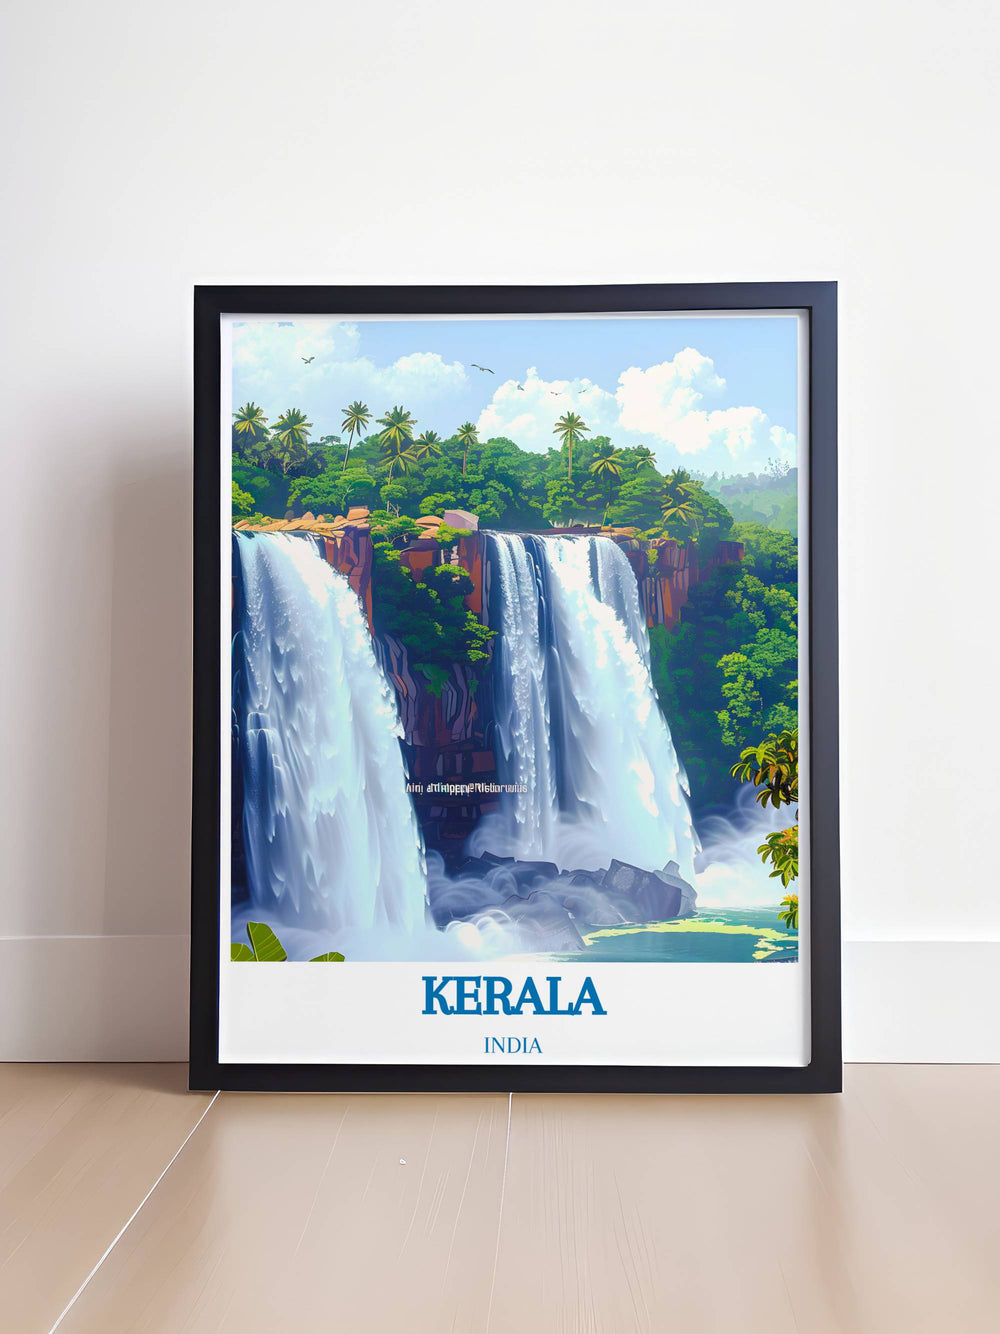 Vintage travel print of Athirappilly Waterfalls, showcasing the magnificent waterfalls amidst the dense greenery of Kerala, India.